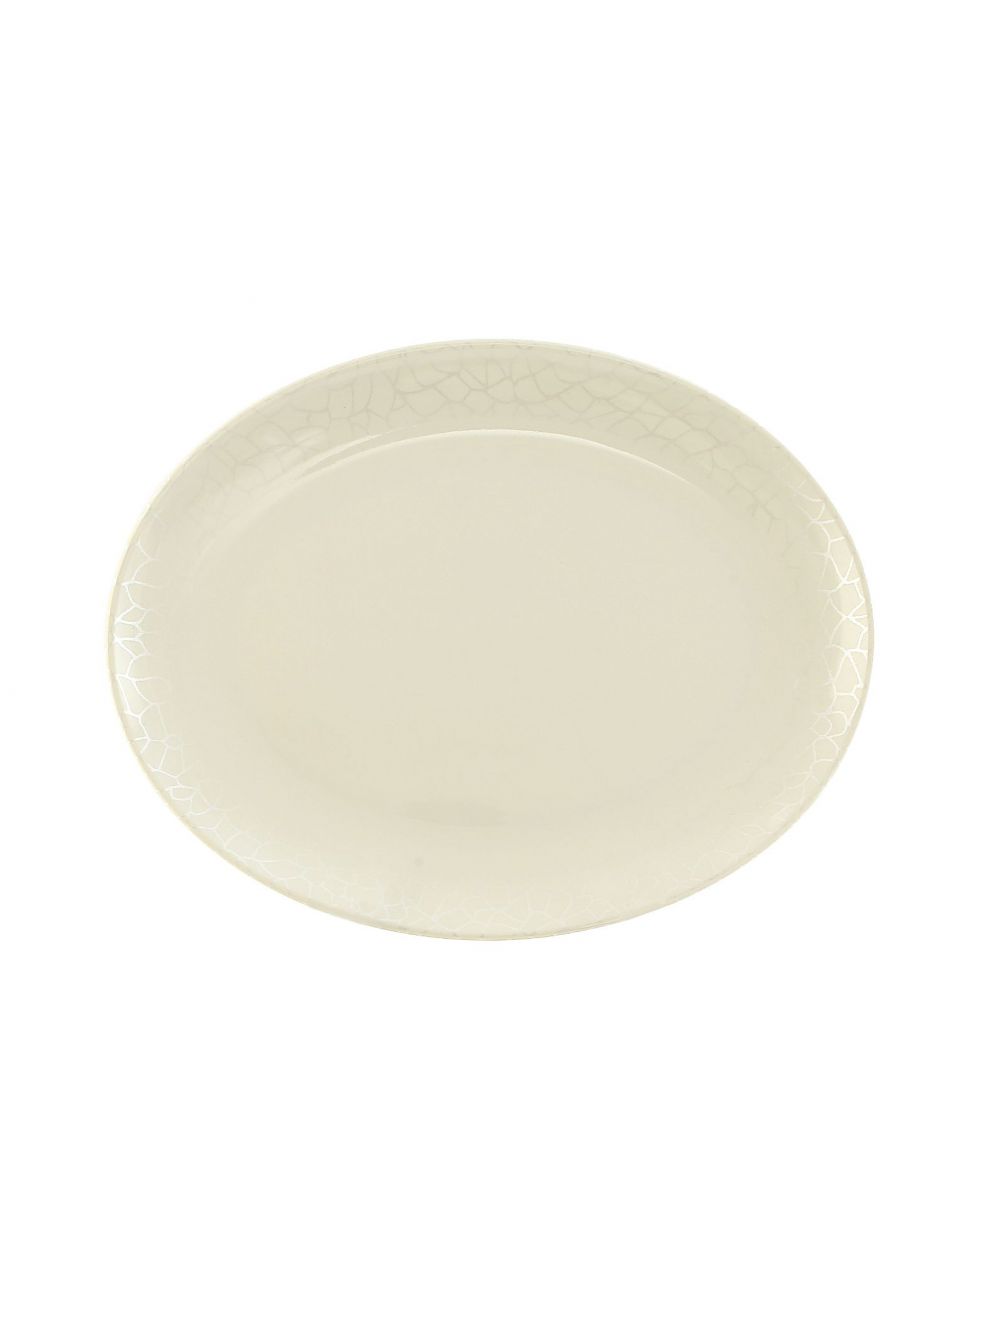 Royalford RF4496 Melamine White Pearl Oval Plate, 14 Inch